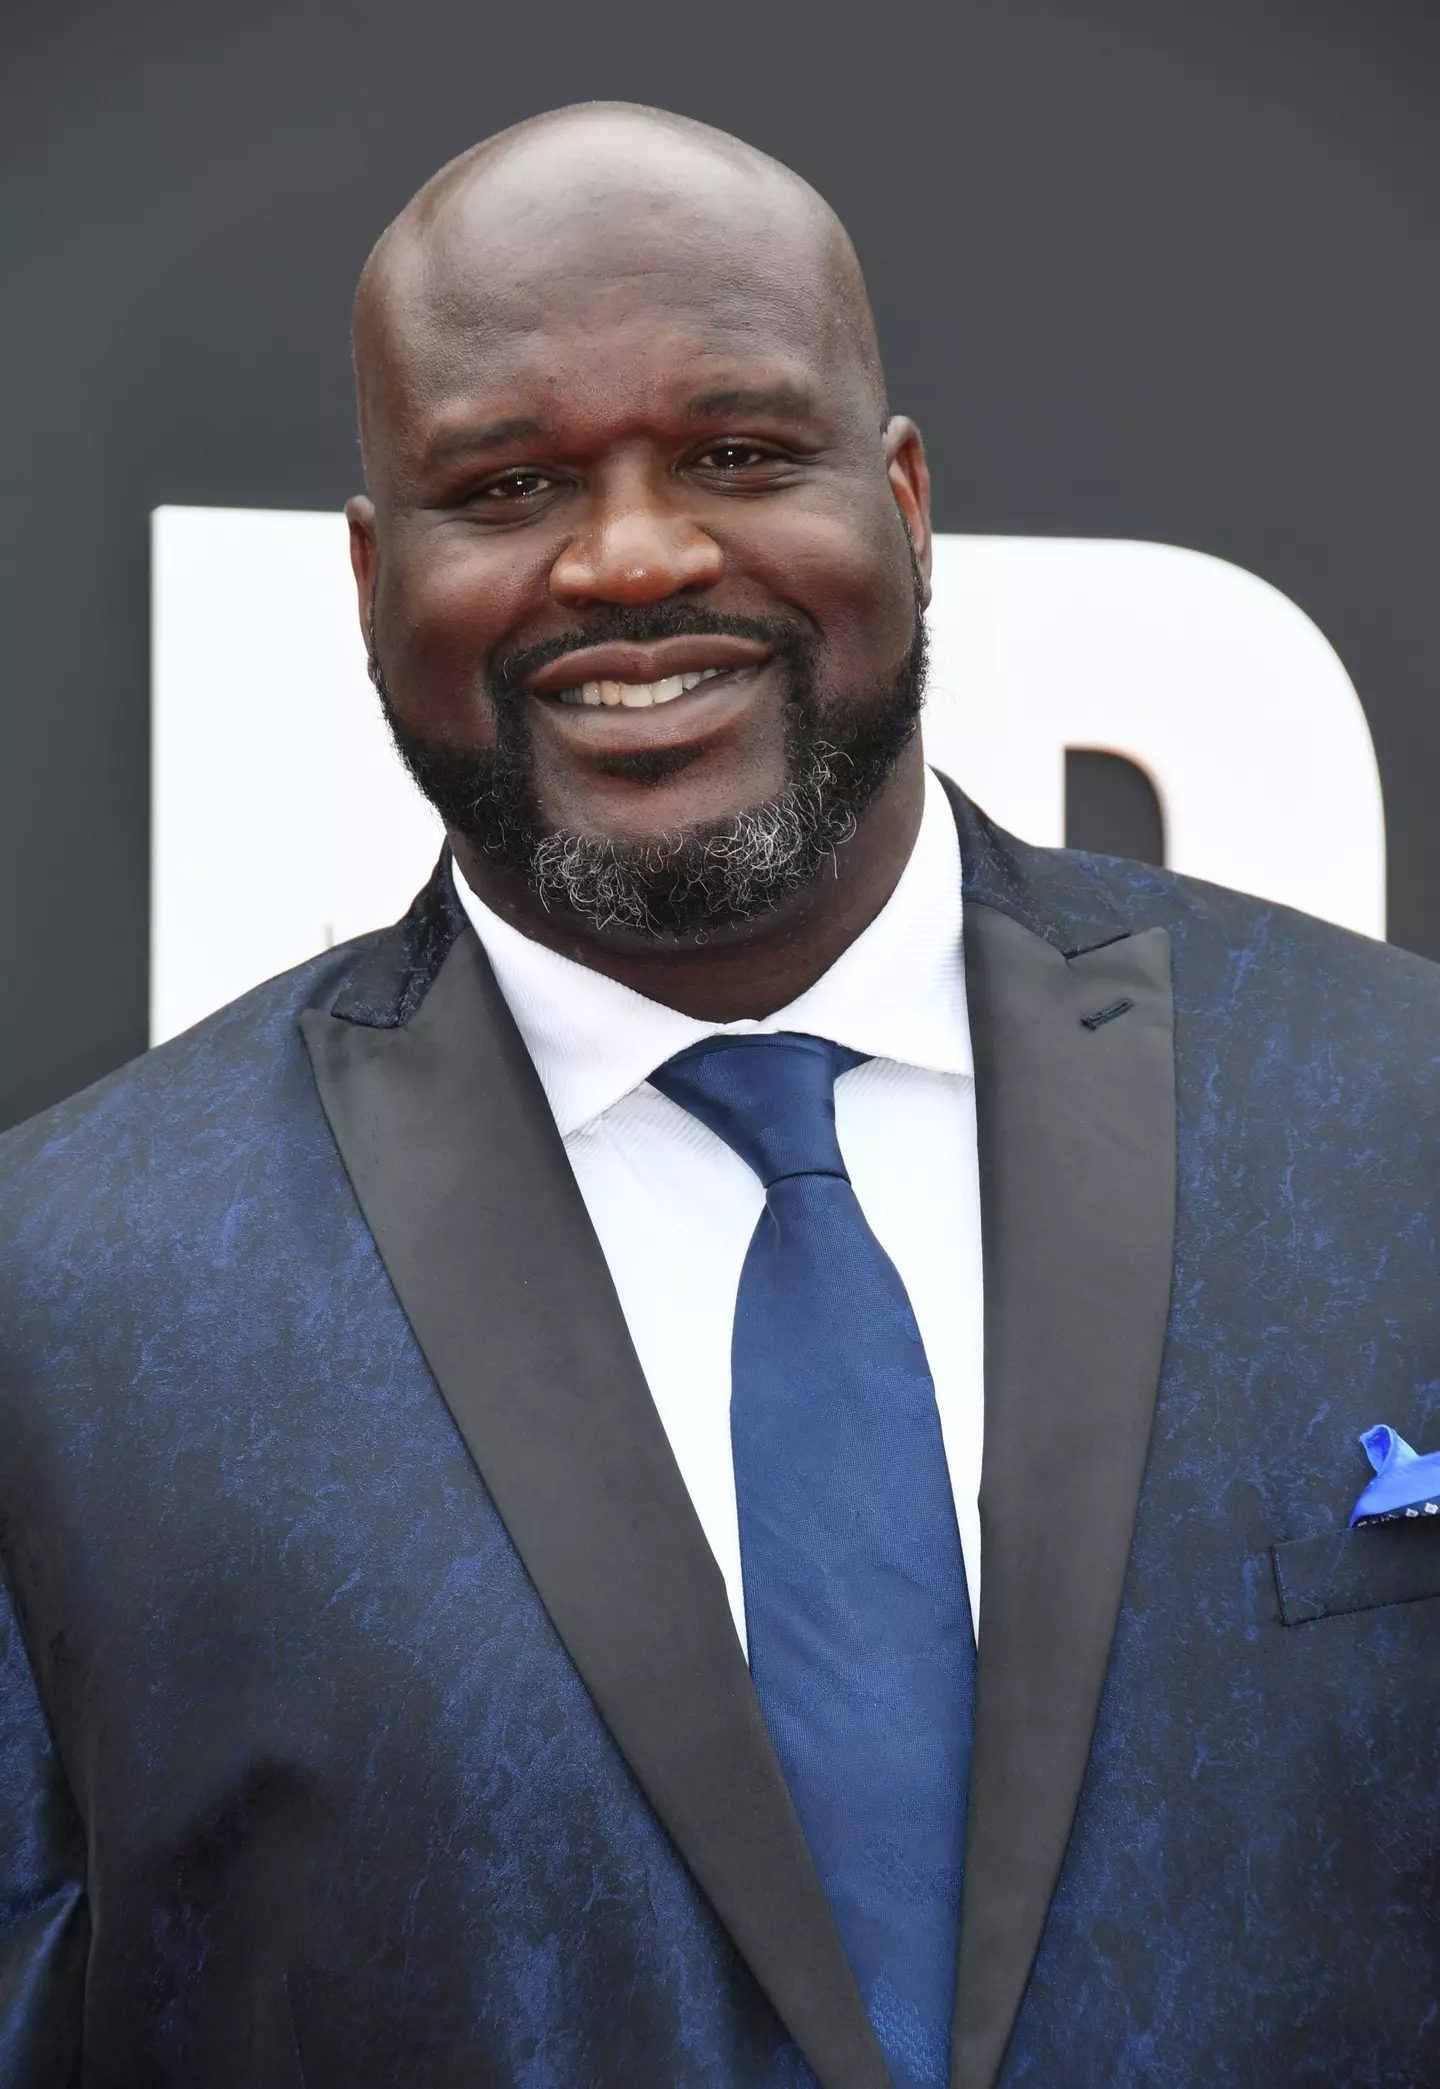 Shaquille O'Neal joined Tinder but revealed the one issue that kept getting in the way.